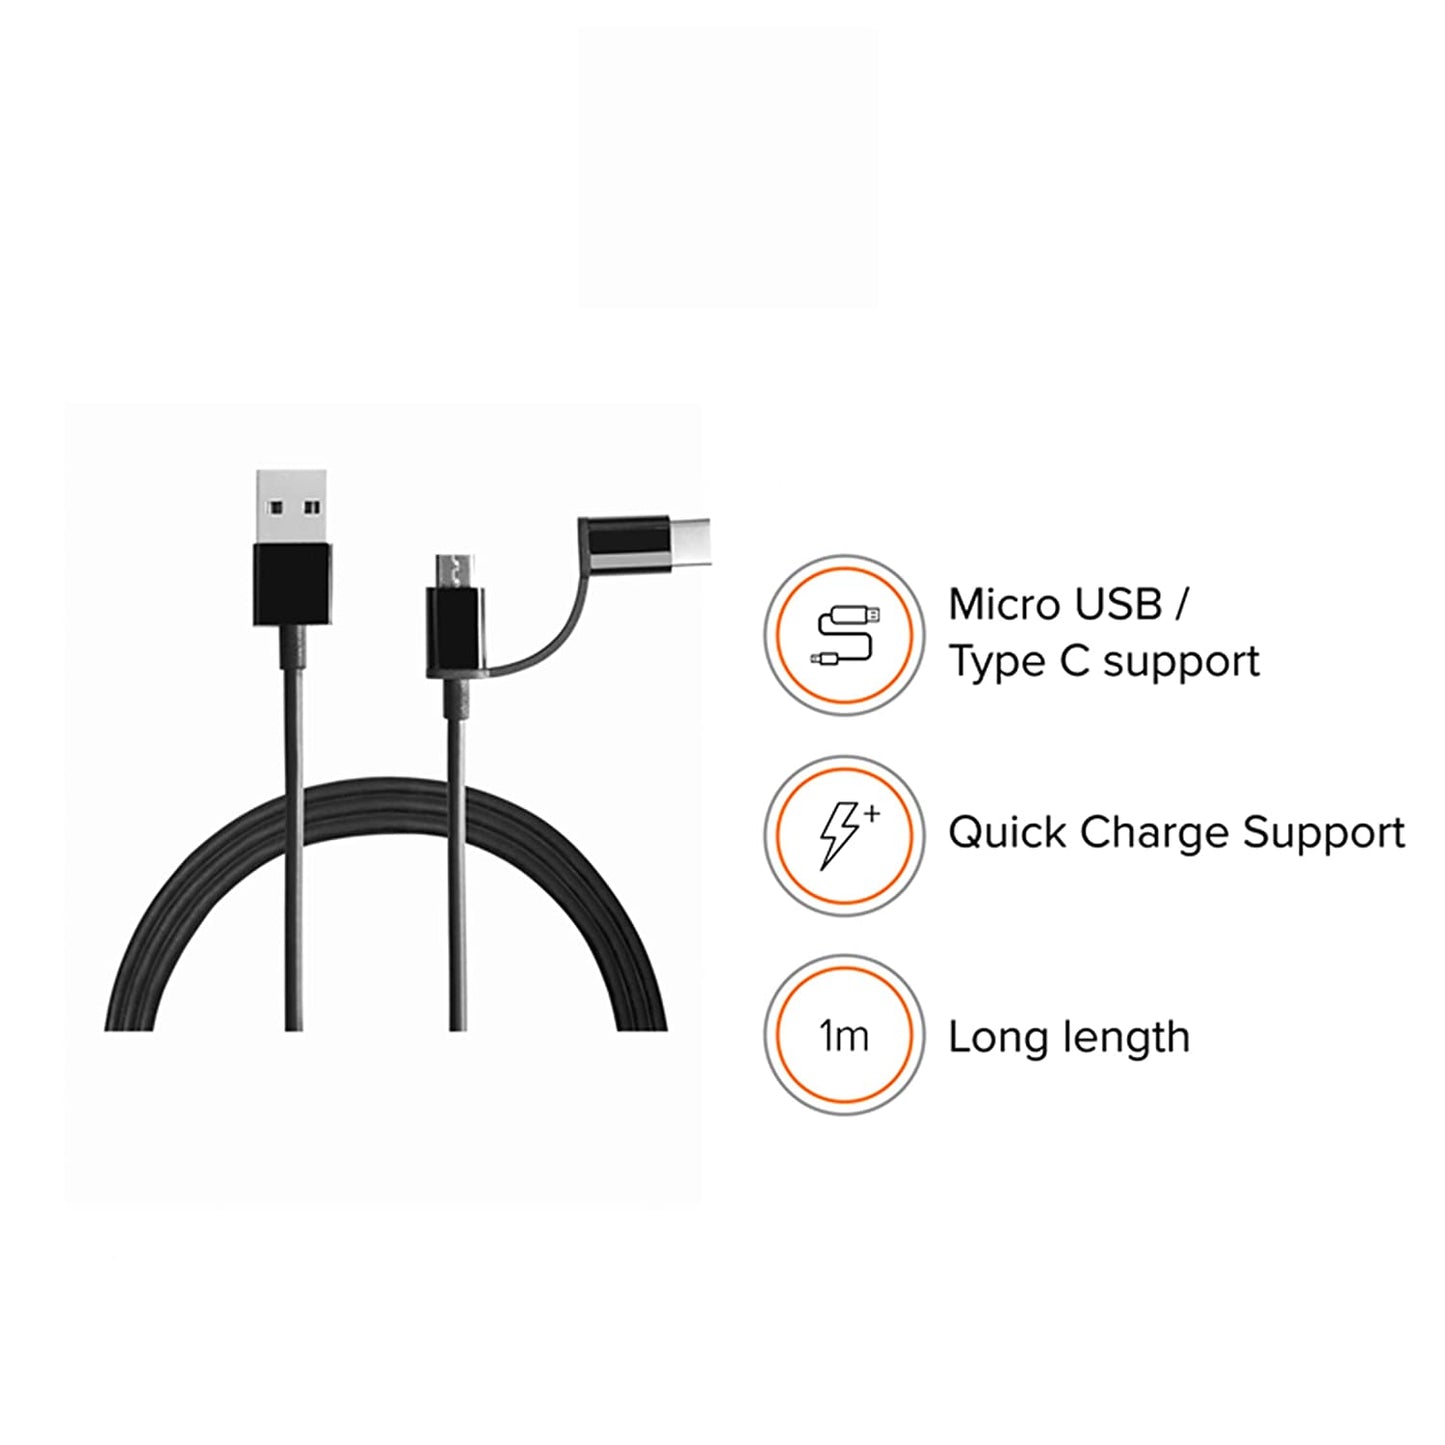 Mi 2-in-1 USB Cable (Micro USB to Type-C,100Cm) | USB Cable For Smartphone and Charging Adapter, Black